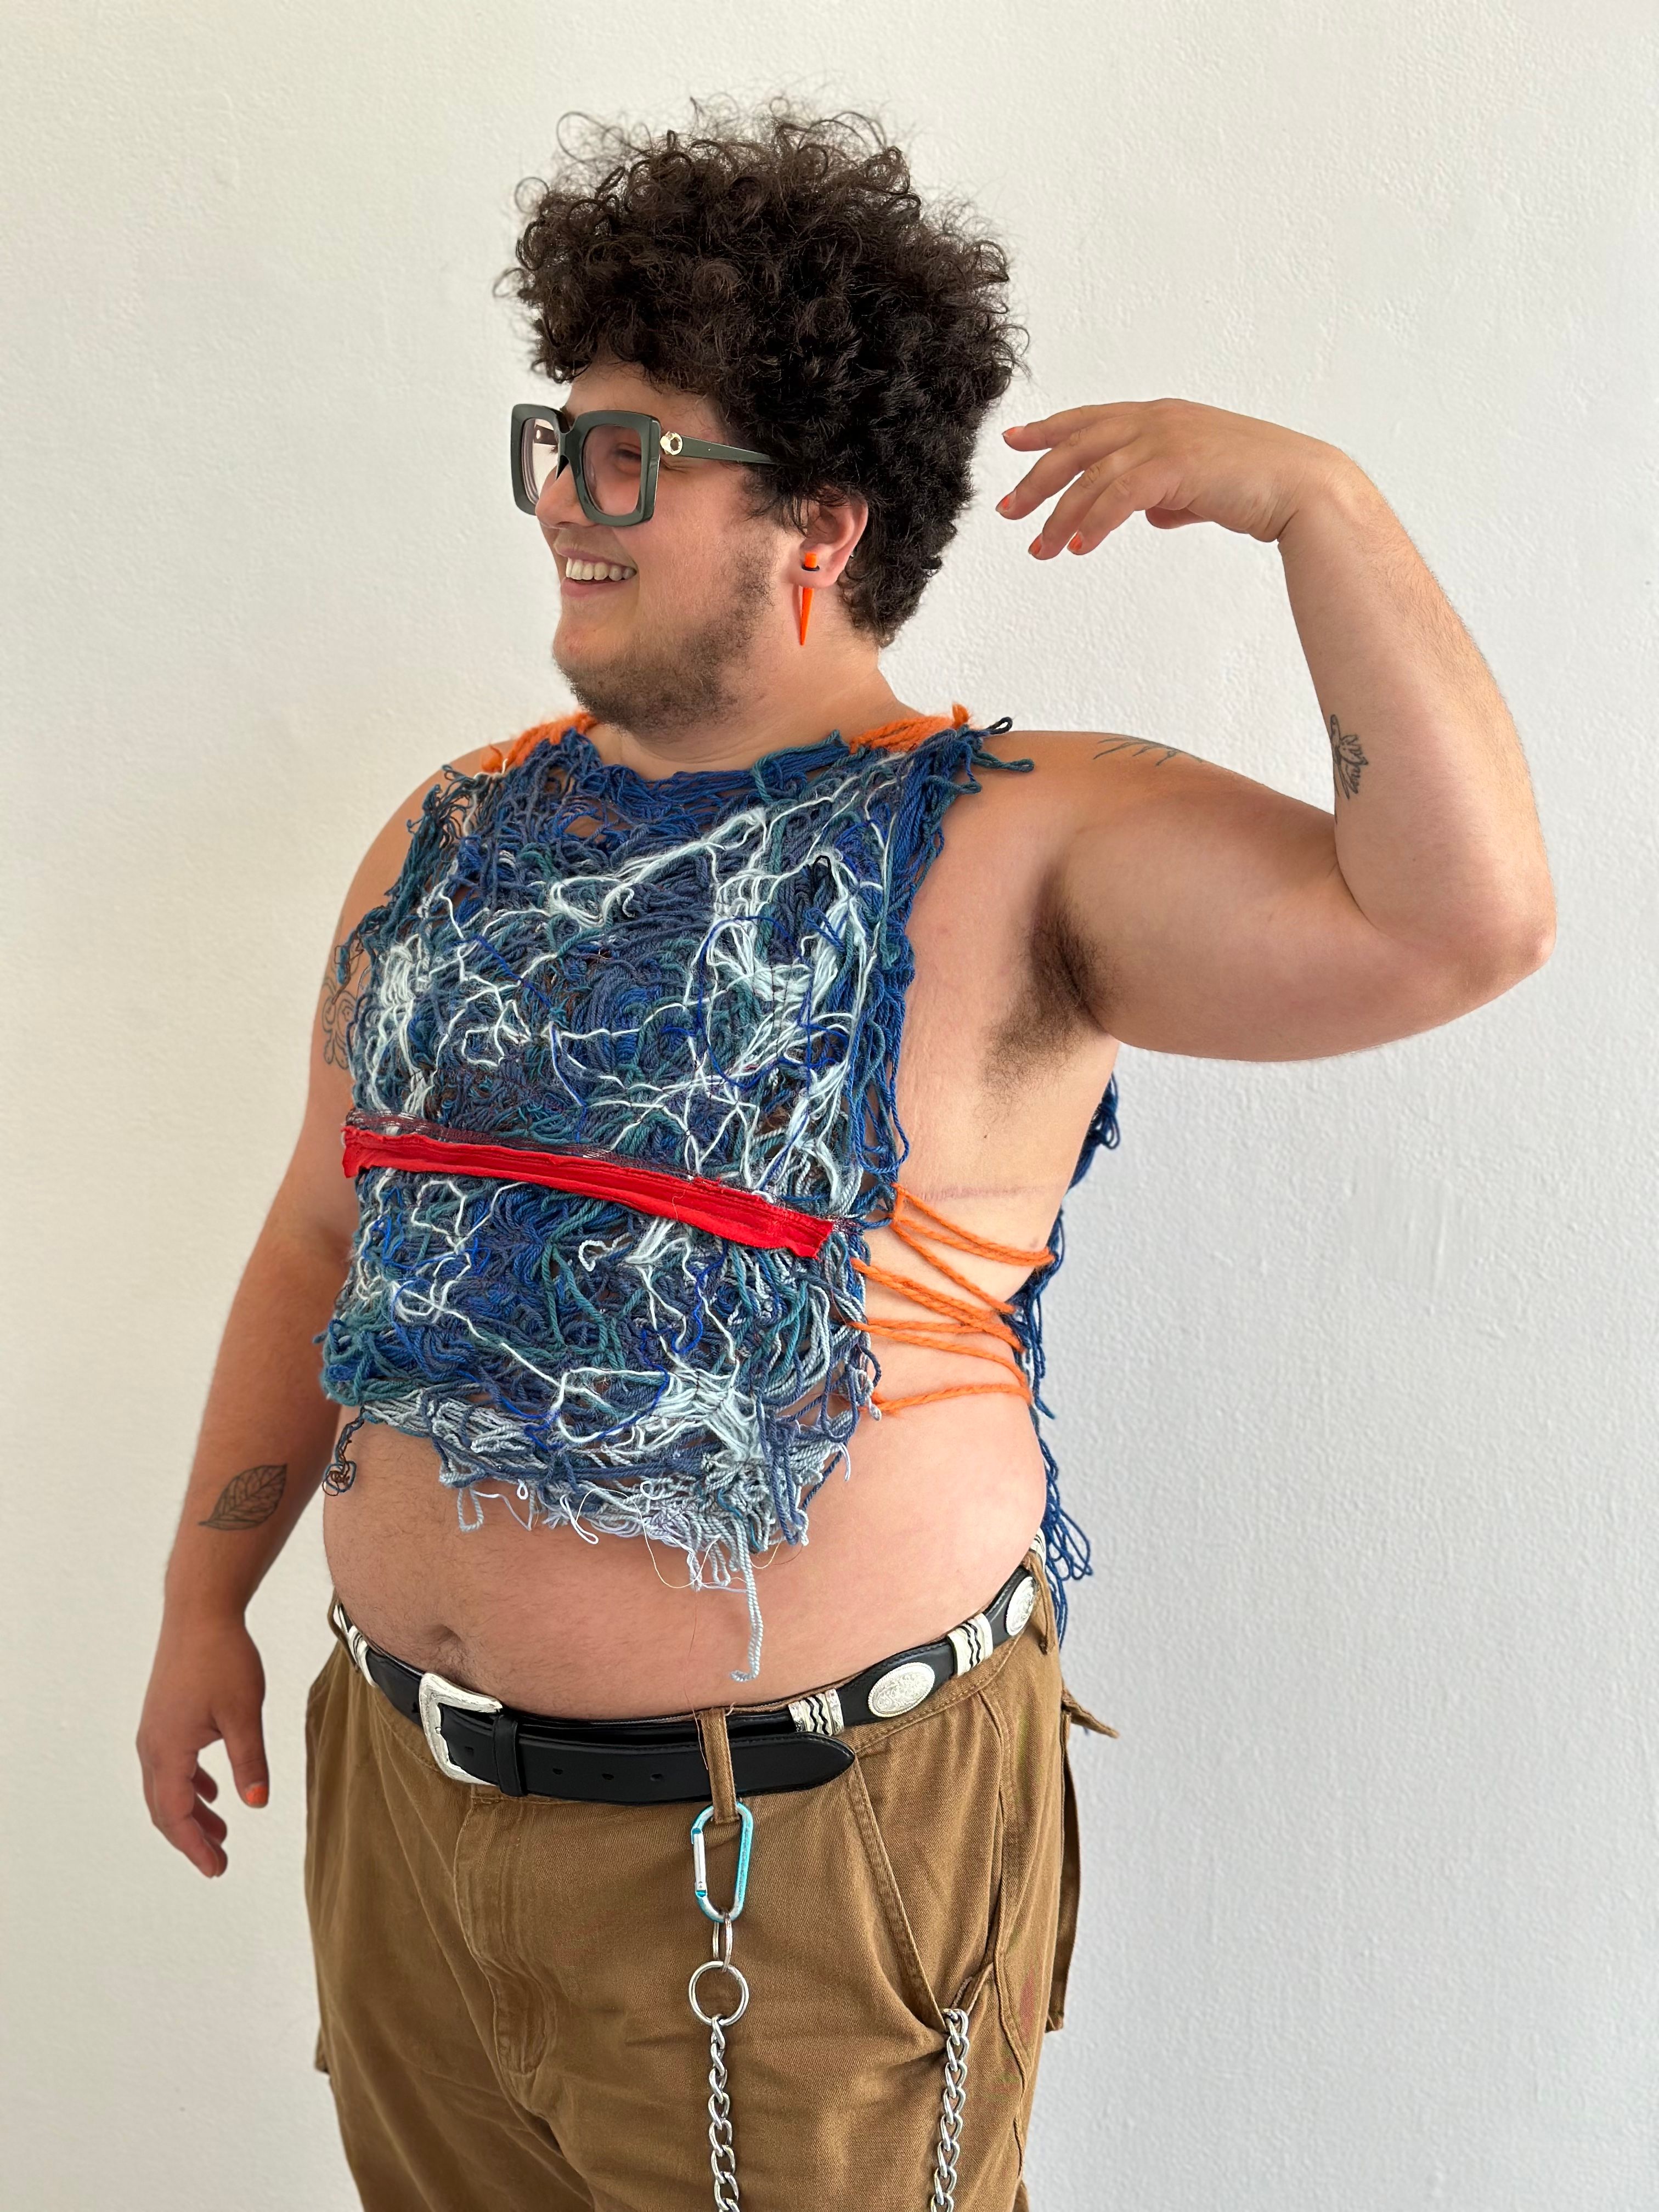 A model wearing a felted garment that emphasizes his top-surgery scars.